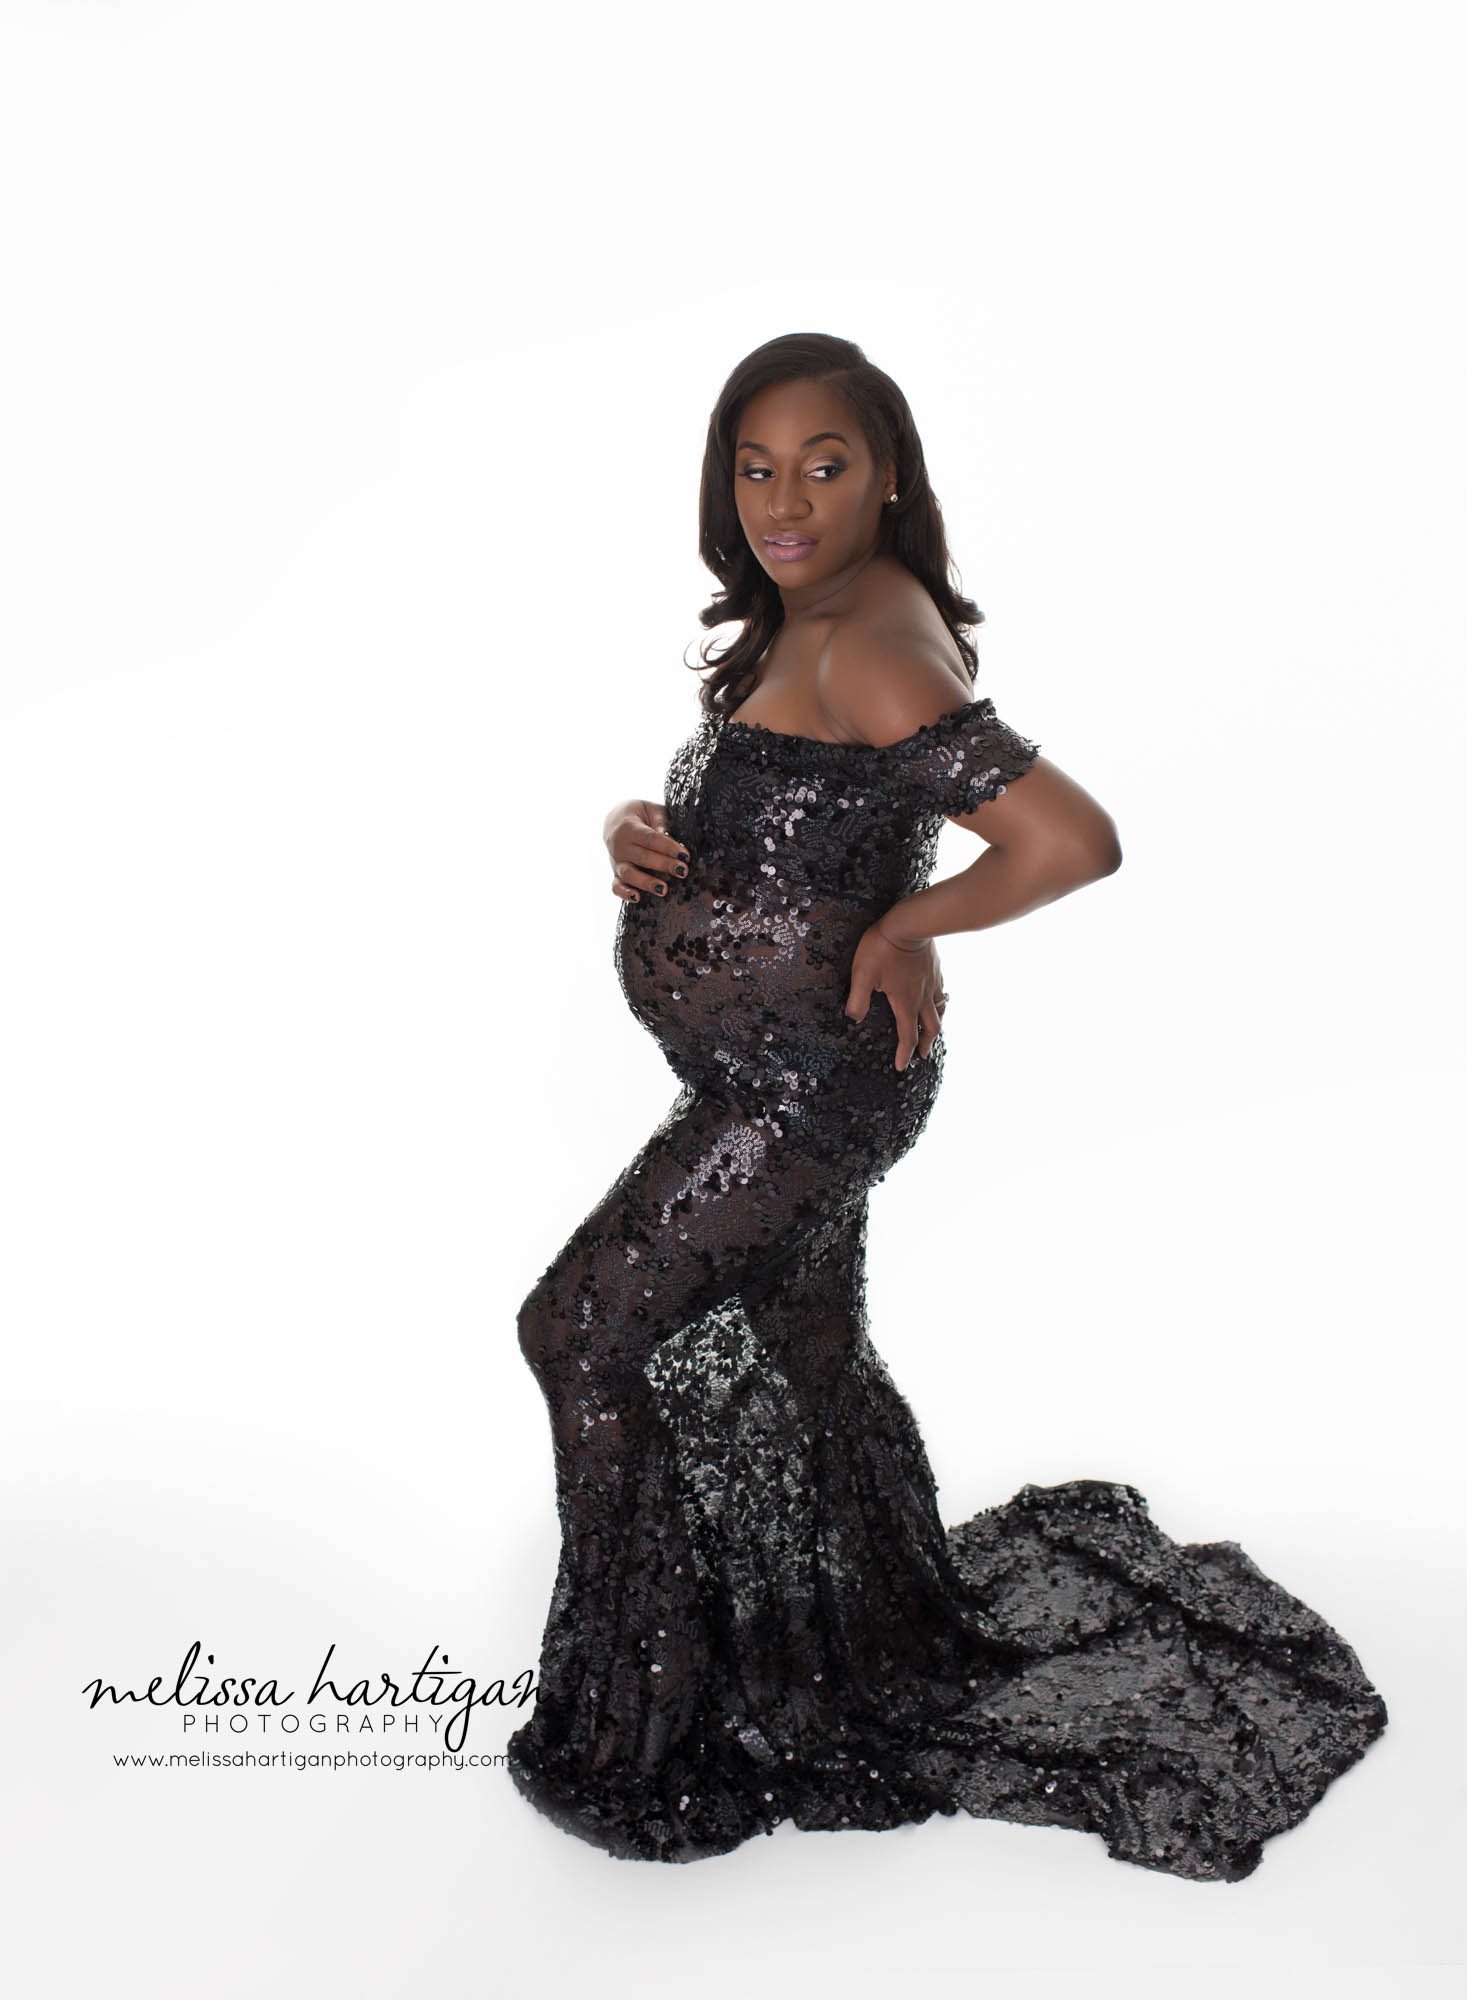 CT Newborn and Maternity Photographer maternity pose wearing long black sequined dress